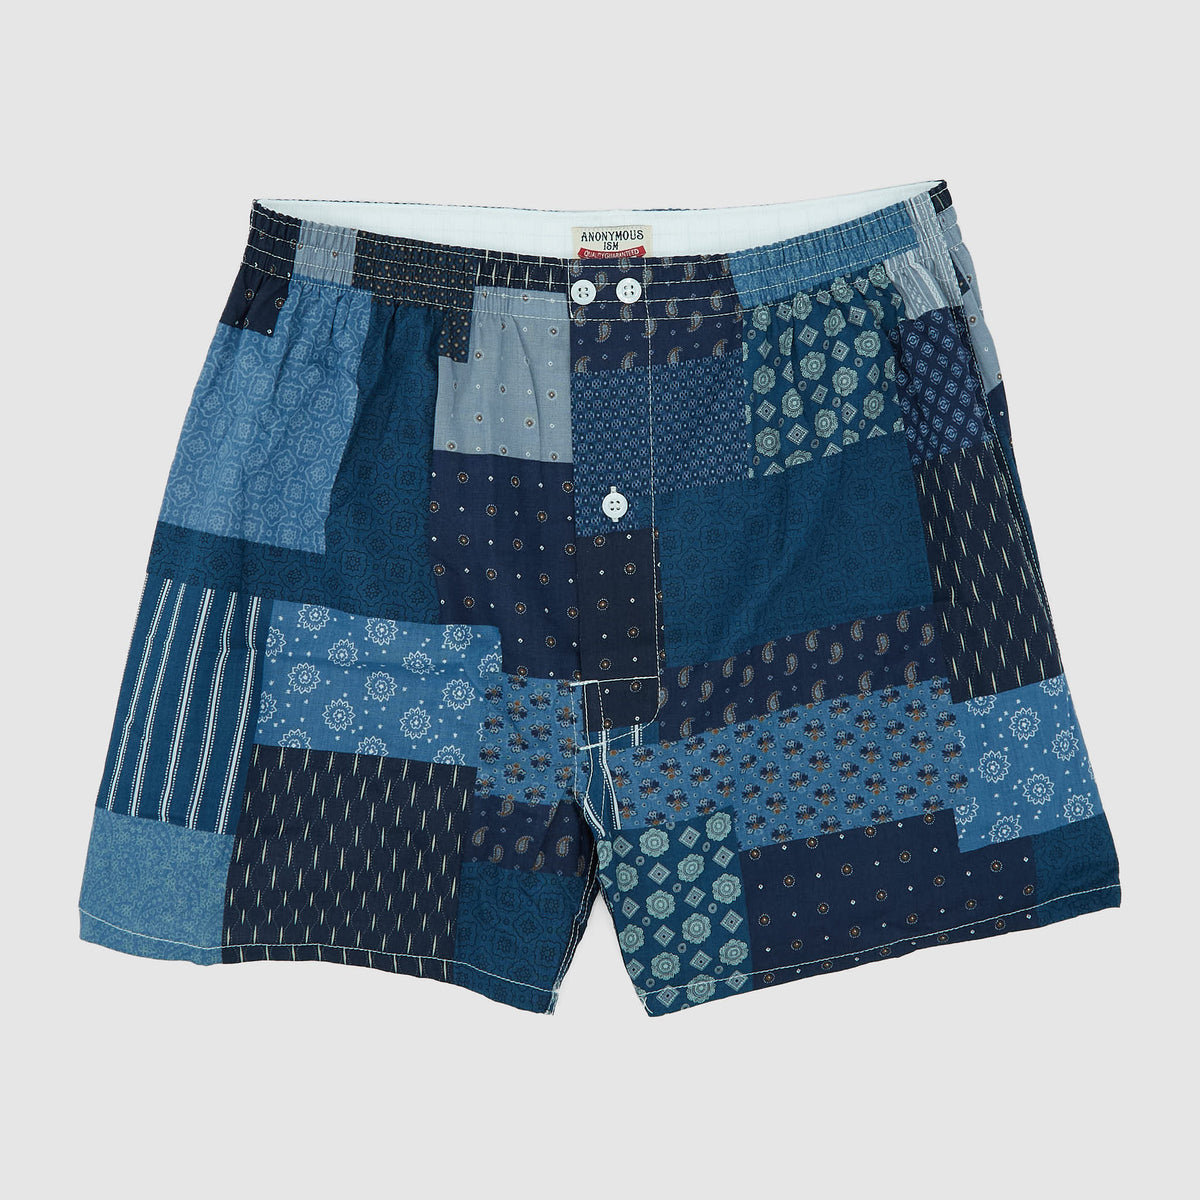 Anonymous Ism Patchwork Boxers